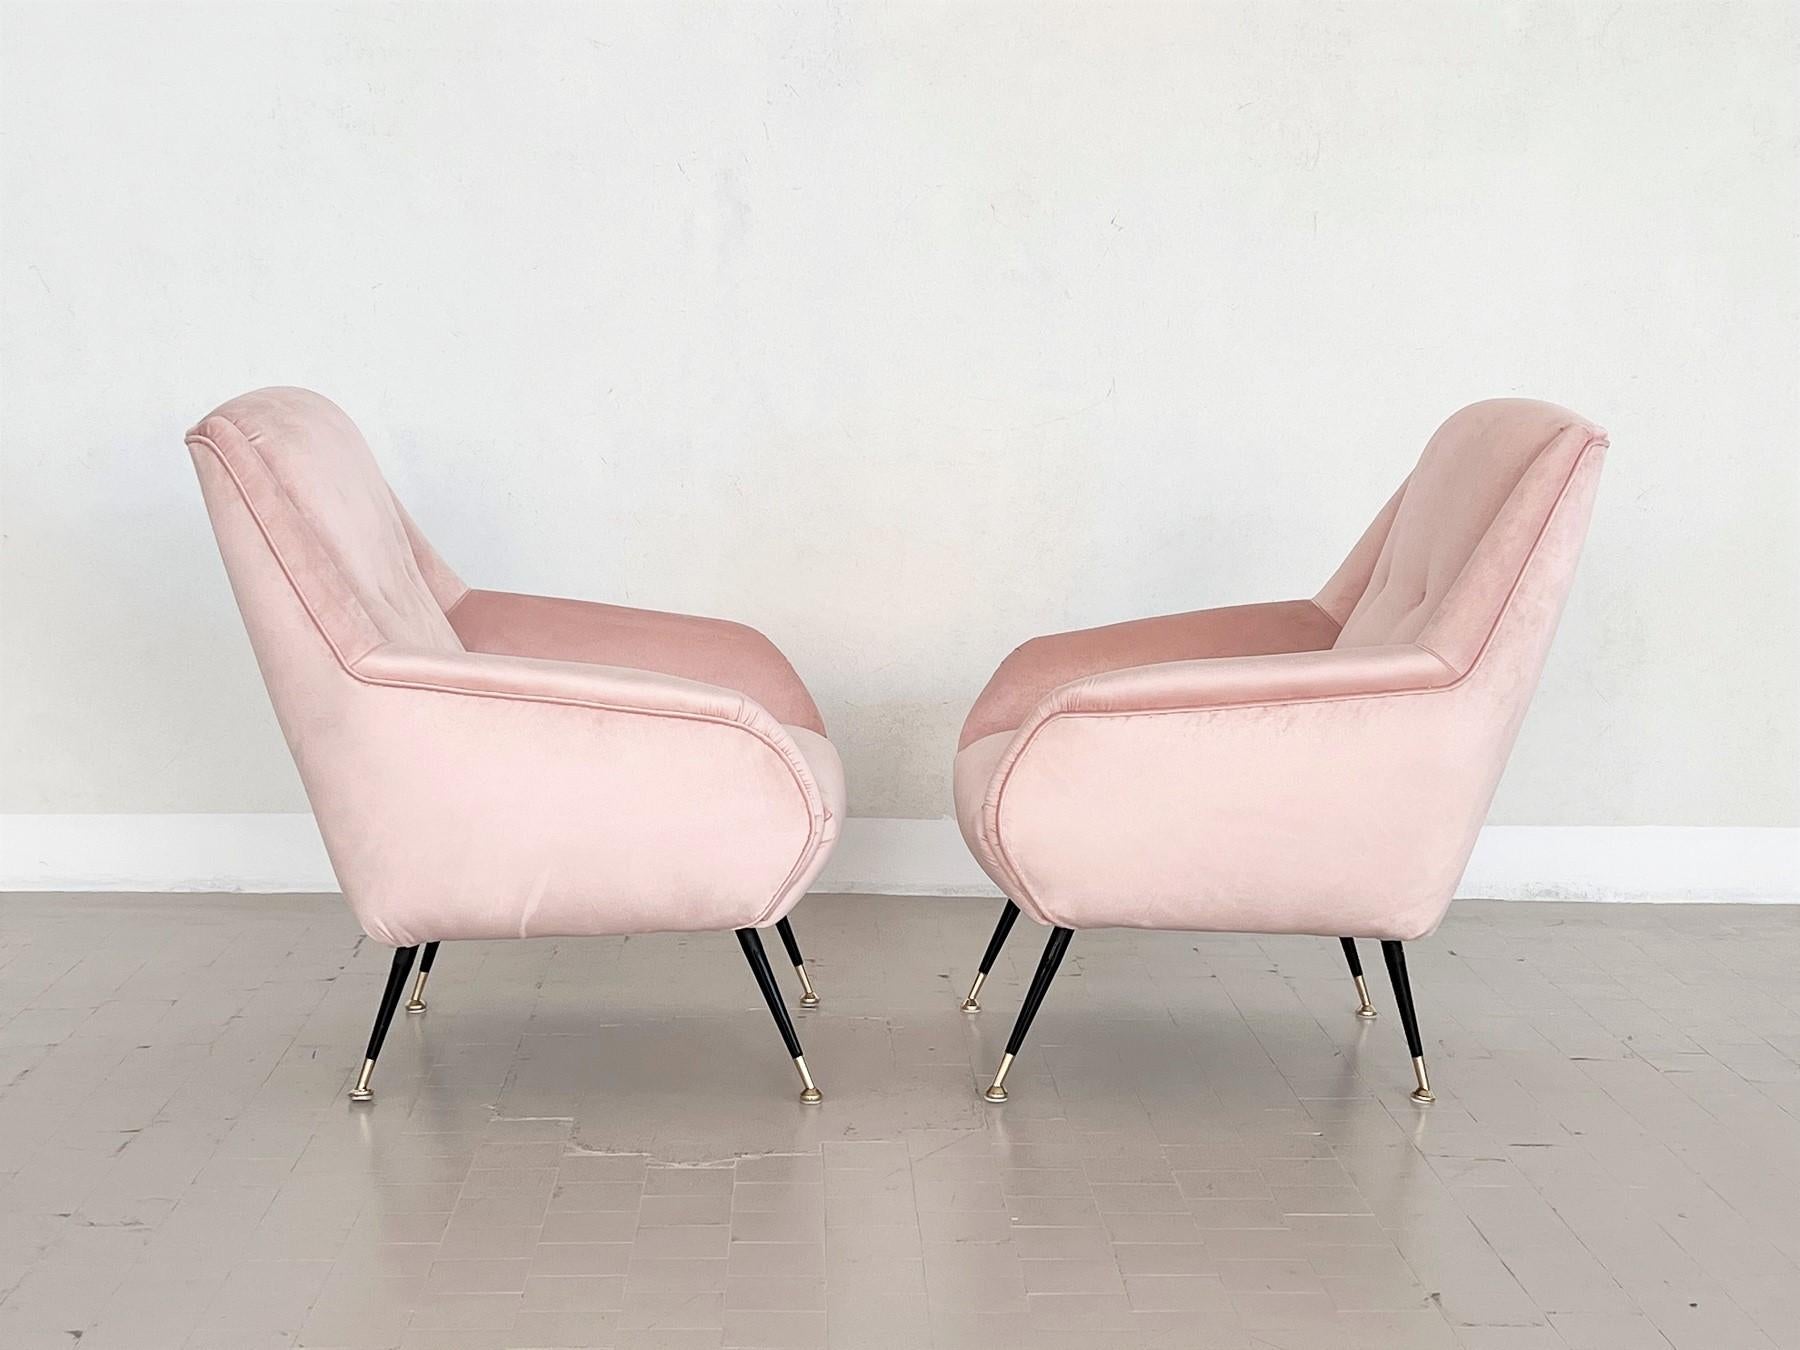 Italian Midcentury Armchairs in Soft Pink Velvet and Brass Tips, 1950s For Sale 5